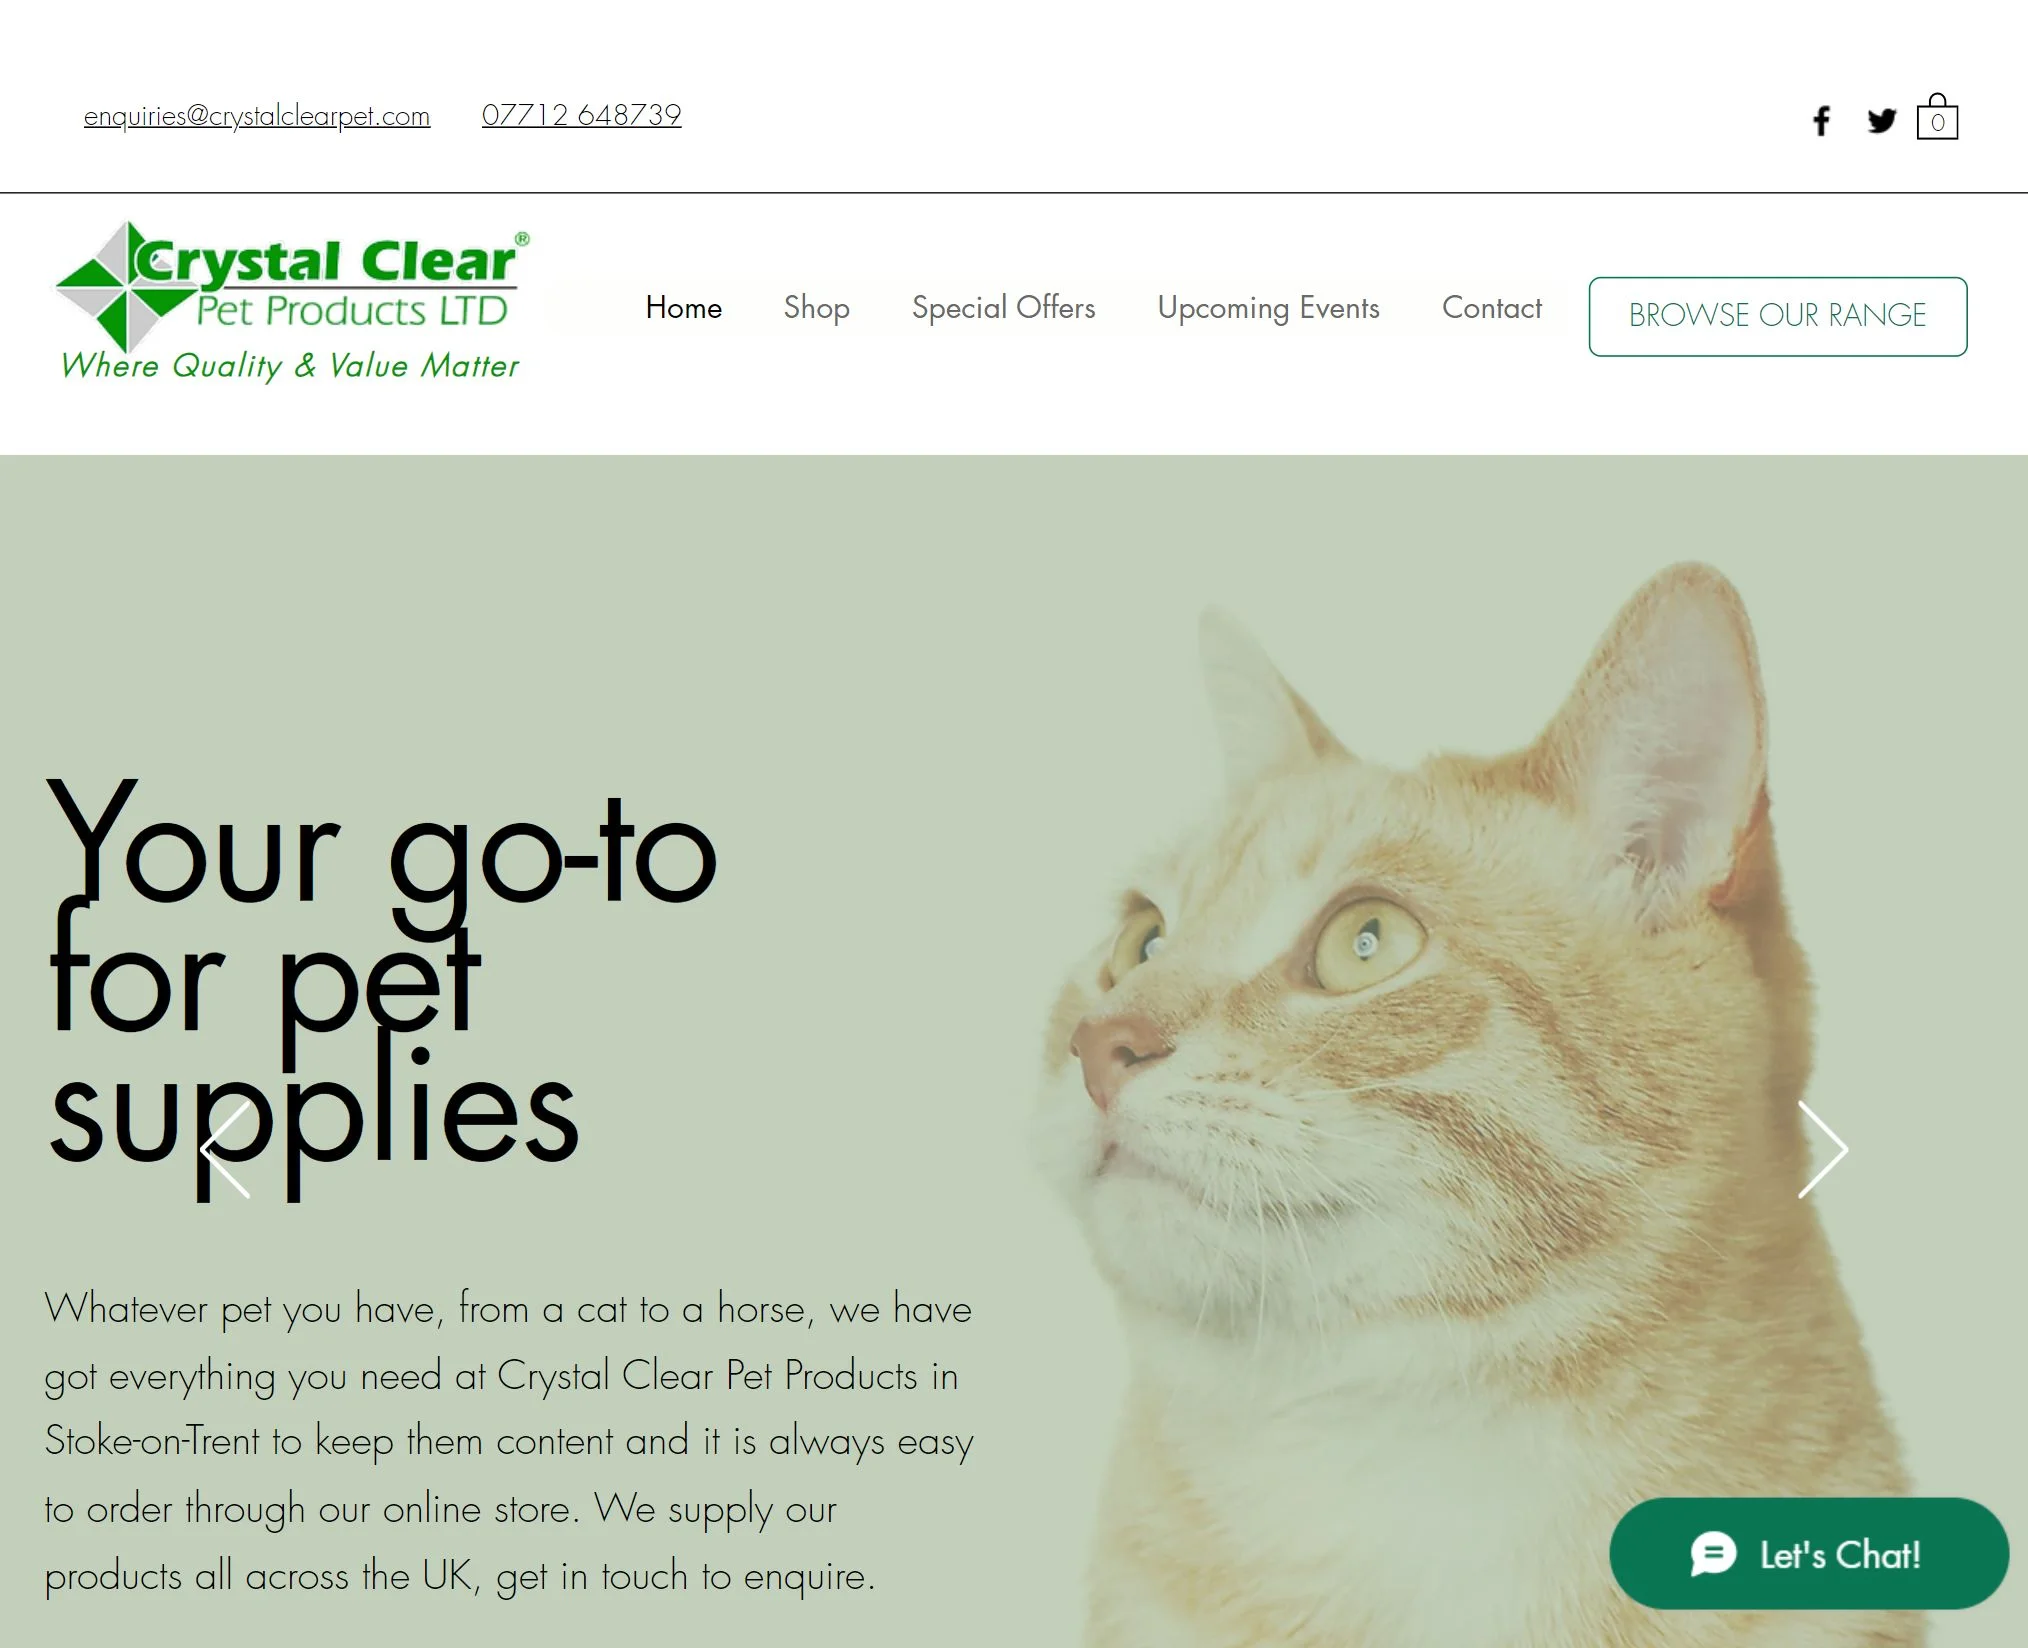 crystalclearpet.com homepage